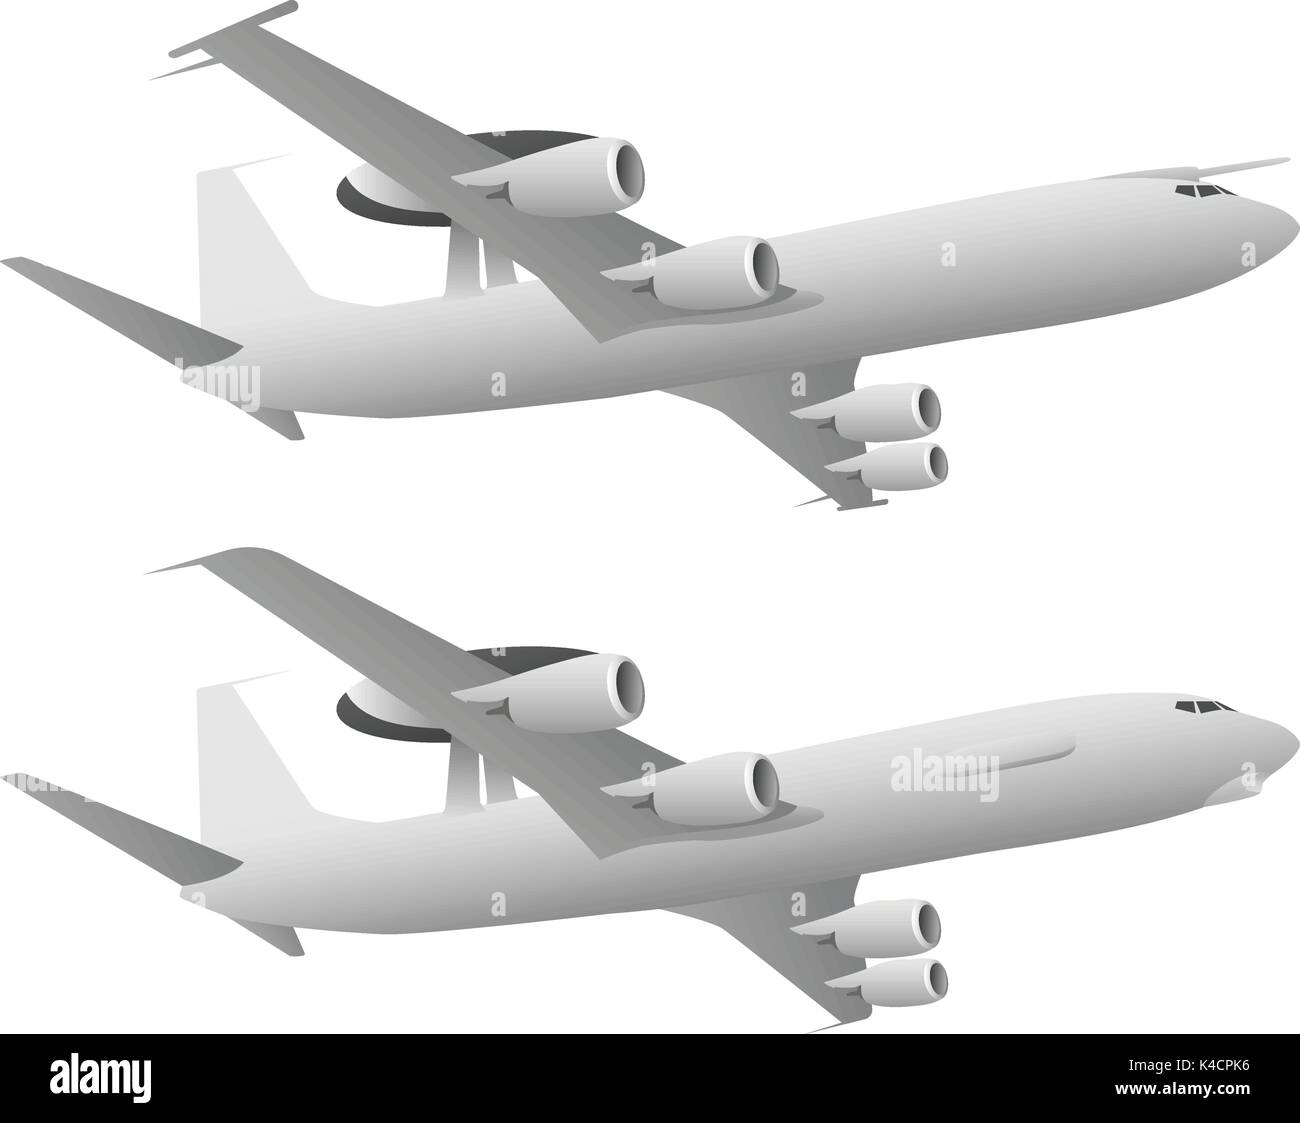 AWACS Airborne Warning and Control System Aircraft Stock Vector